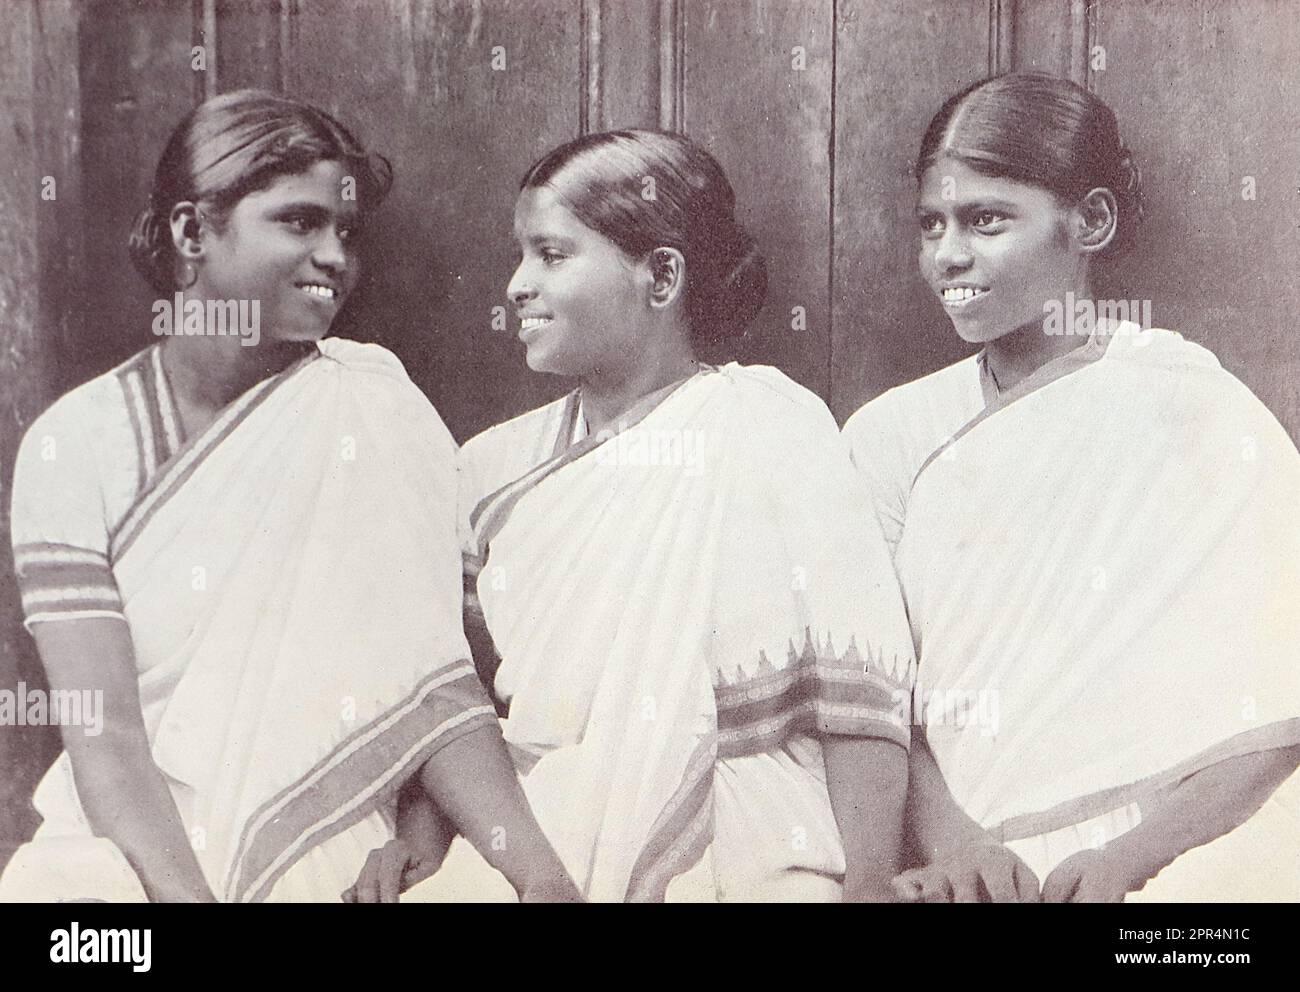 Three convert workers in the Dohnavur compound. Half-tone engraving from a photograph by Mr. Penn of Ootacamund (now known as Ooto), in the Tamil Nadu region of Southern India, c1912. The image relates to the Church of England Zenana Mission’s nursery and compound in Dohnavur, also in Tamil Nadu and about thirty miles from the southern tip of India. The compound was run by Amy Wilson-Carmichael and sought to promote Christianity among babies and children (at the time only girls, many who were victims of temple prostitution). Stock Photo